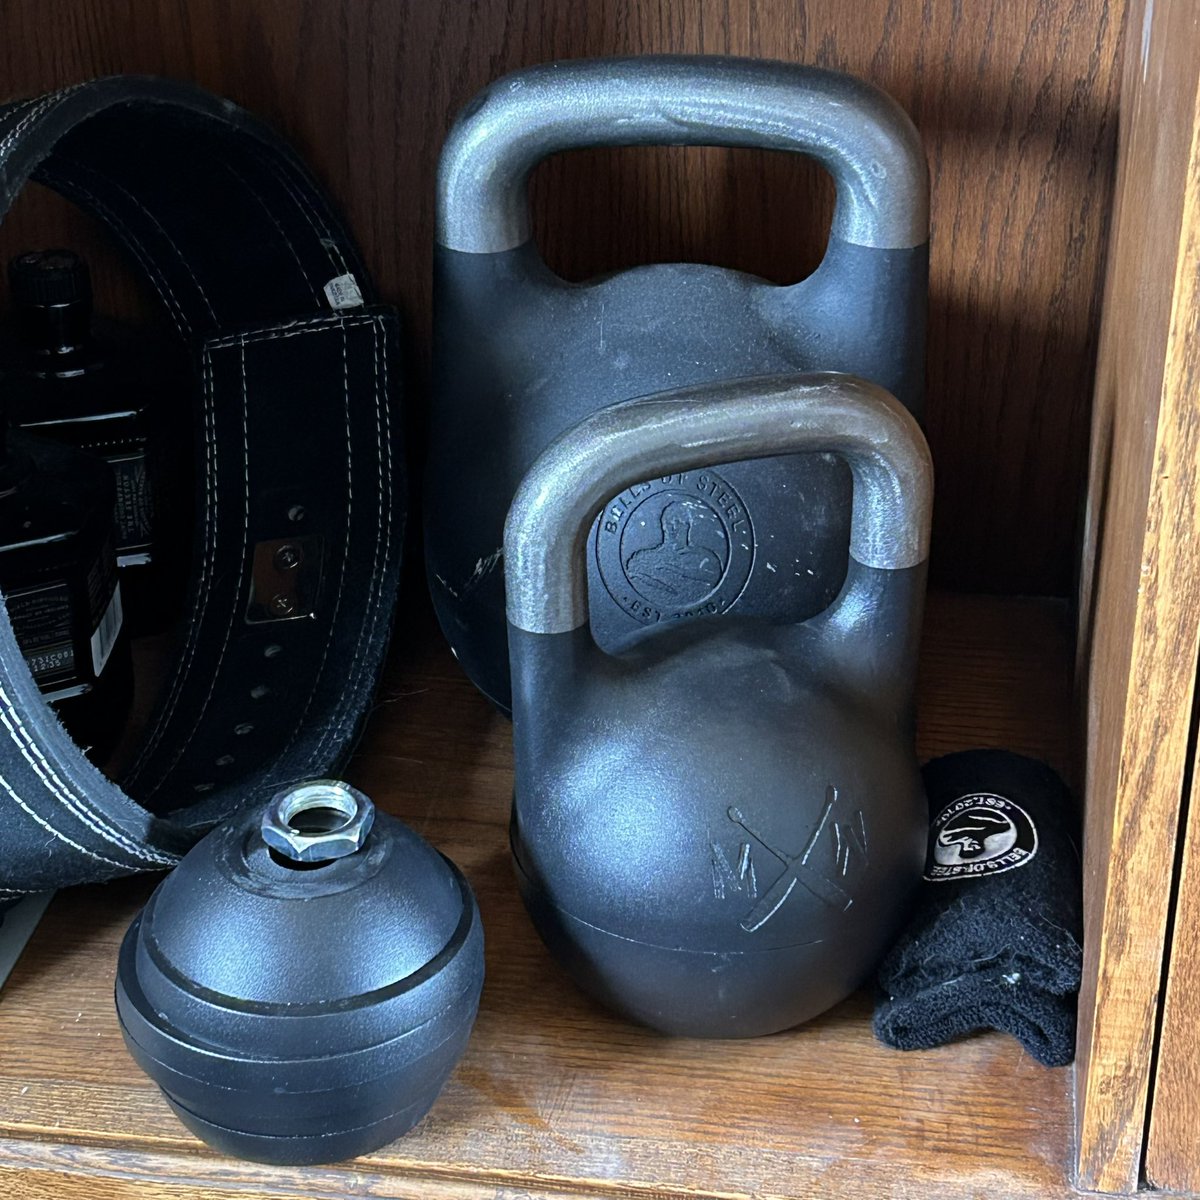 New baby adjustable kettlebell arrived. 6-12 kg. So cute 🥹